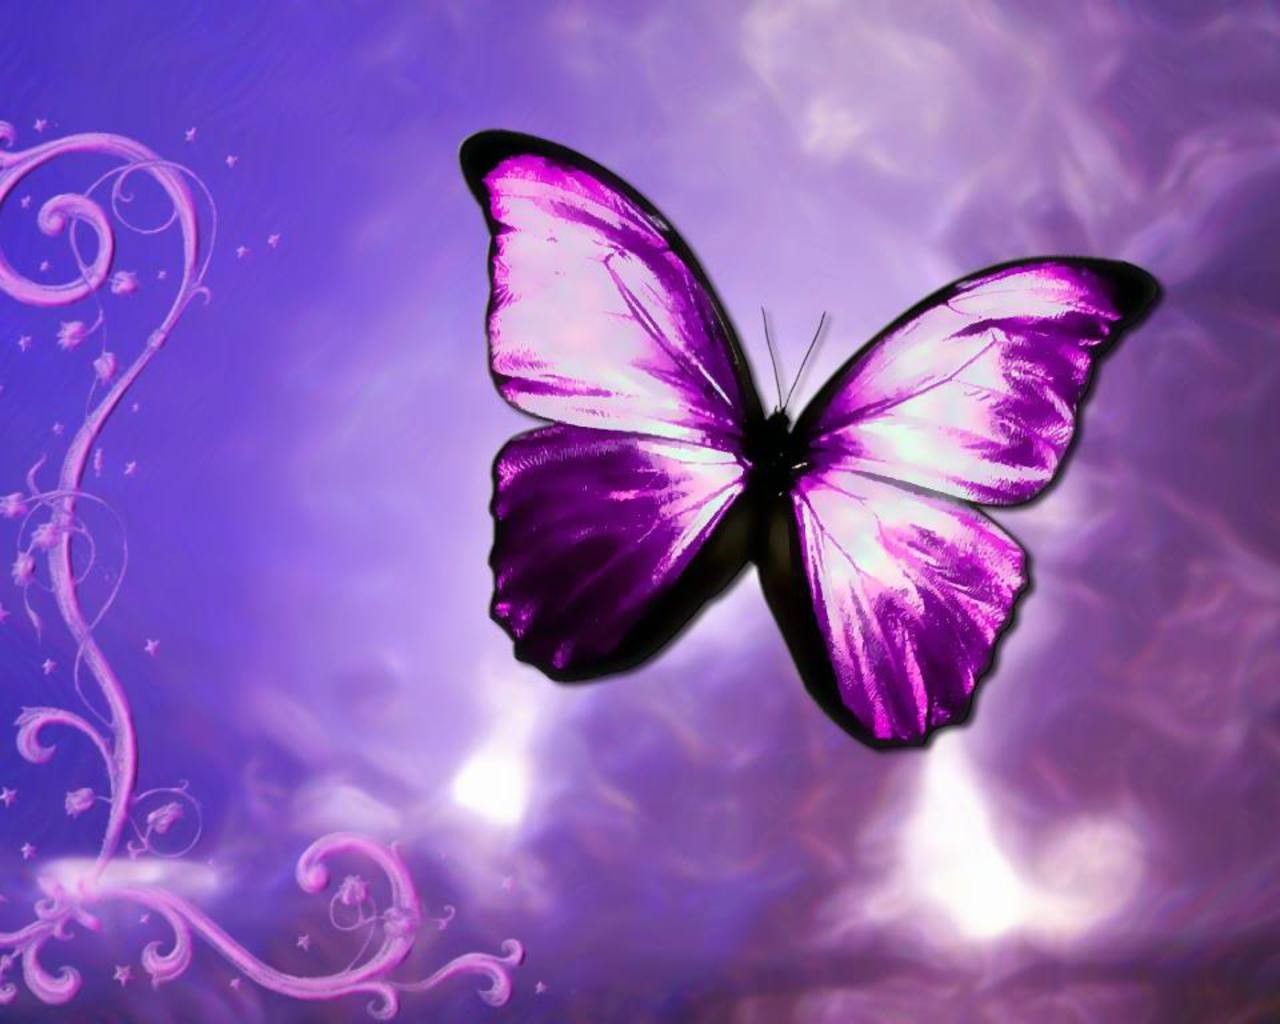 Moving Butterfly Wallpaper